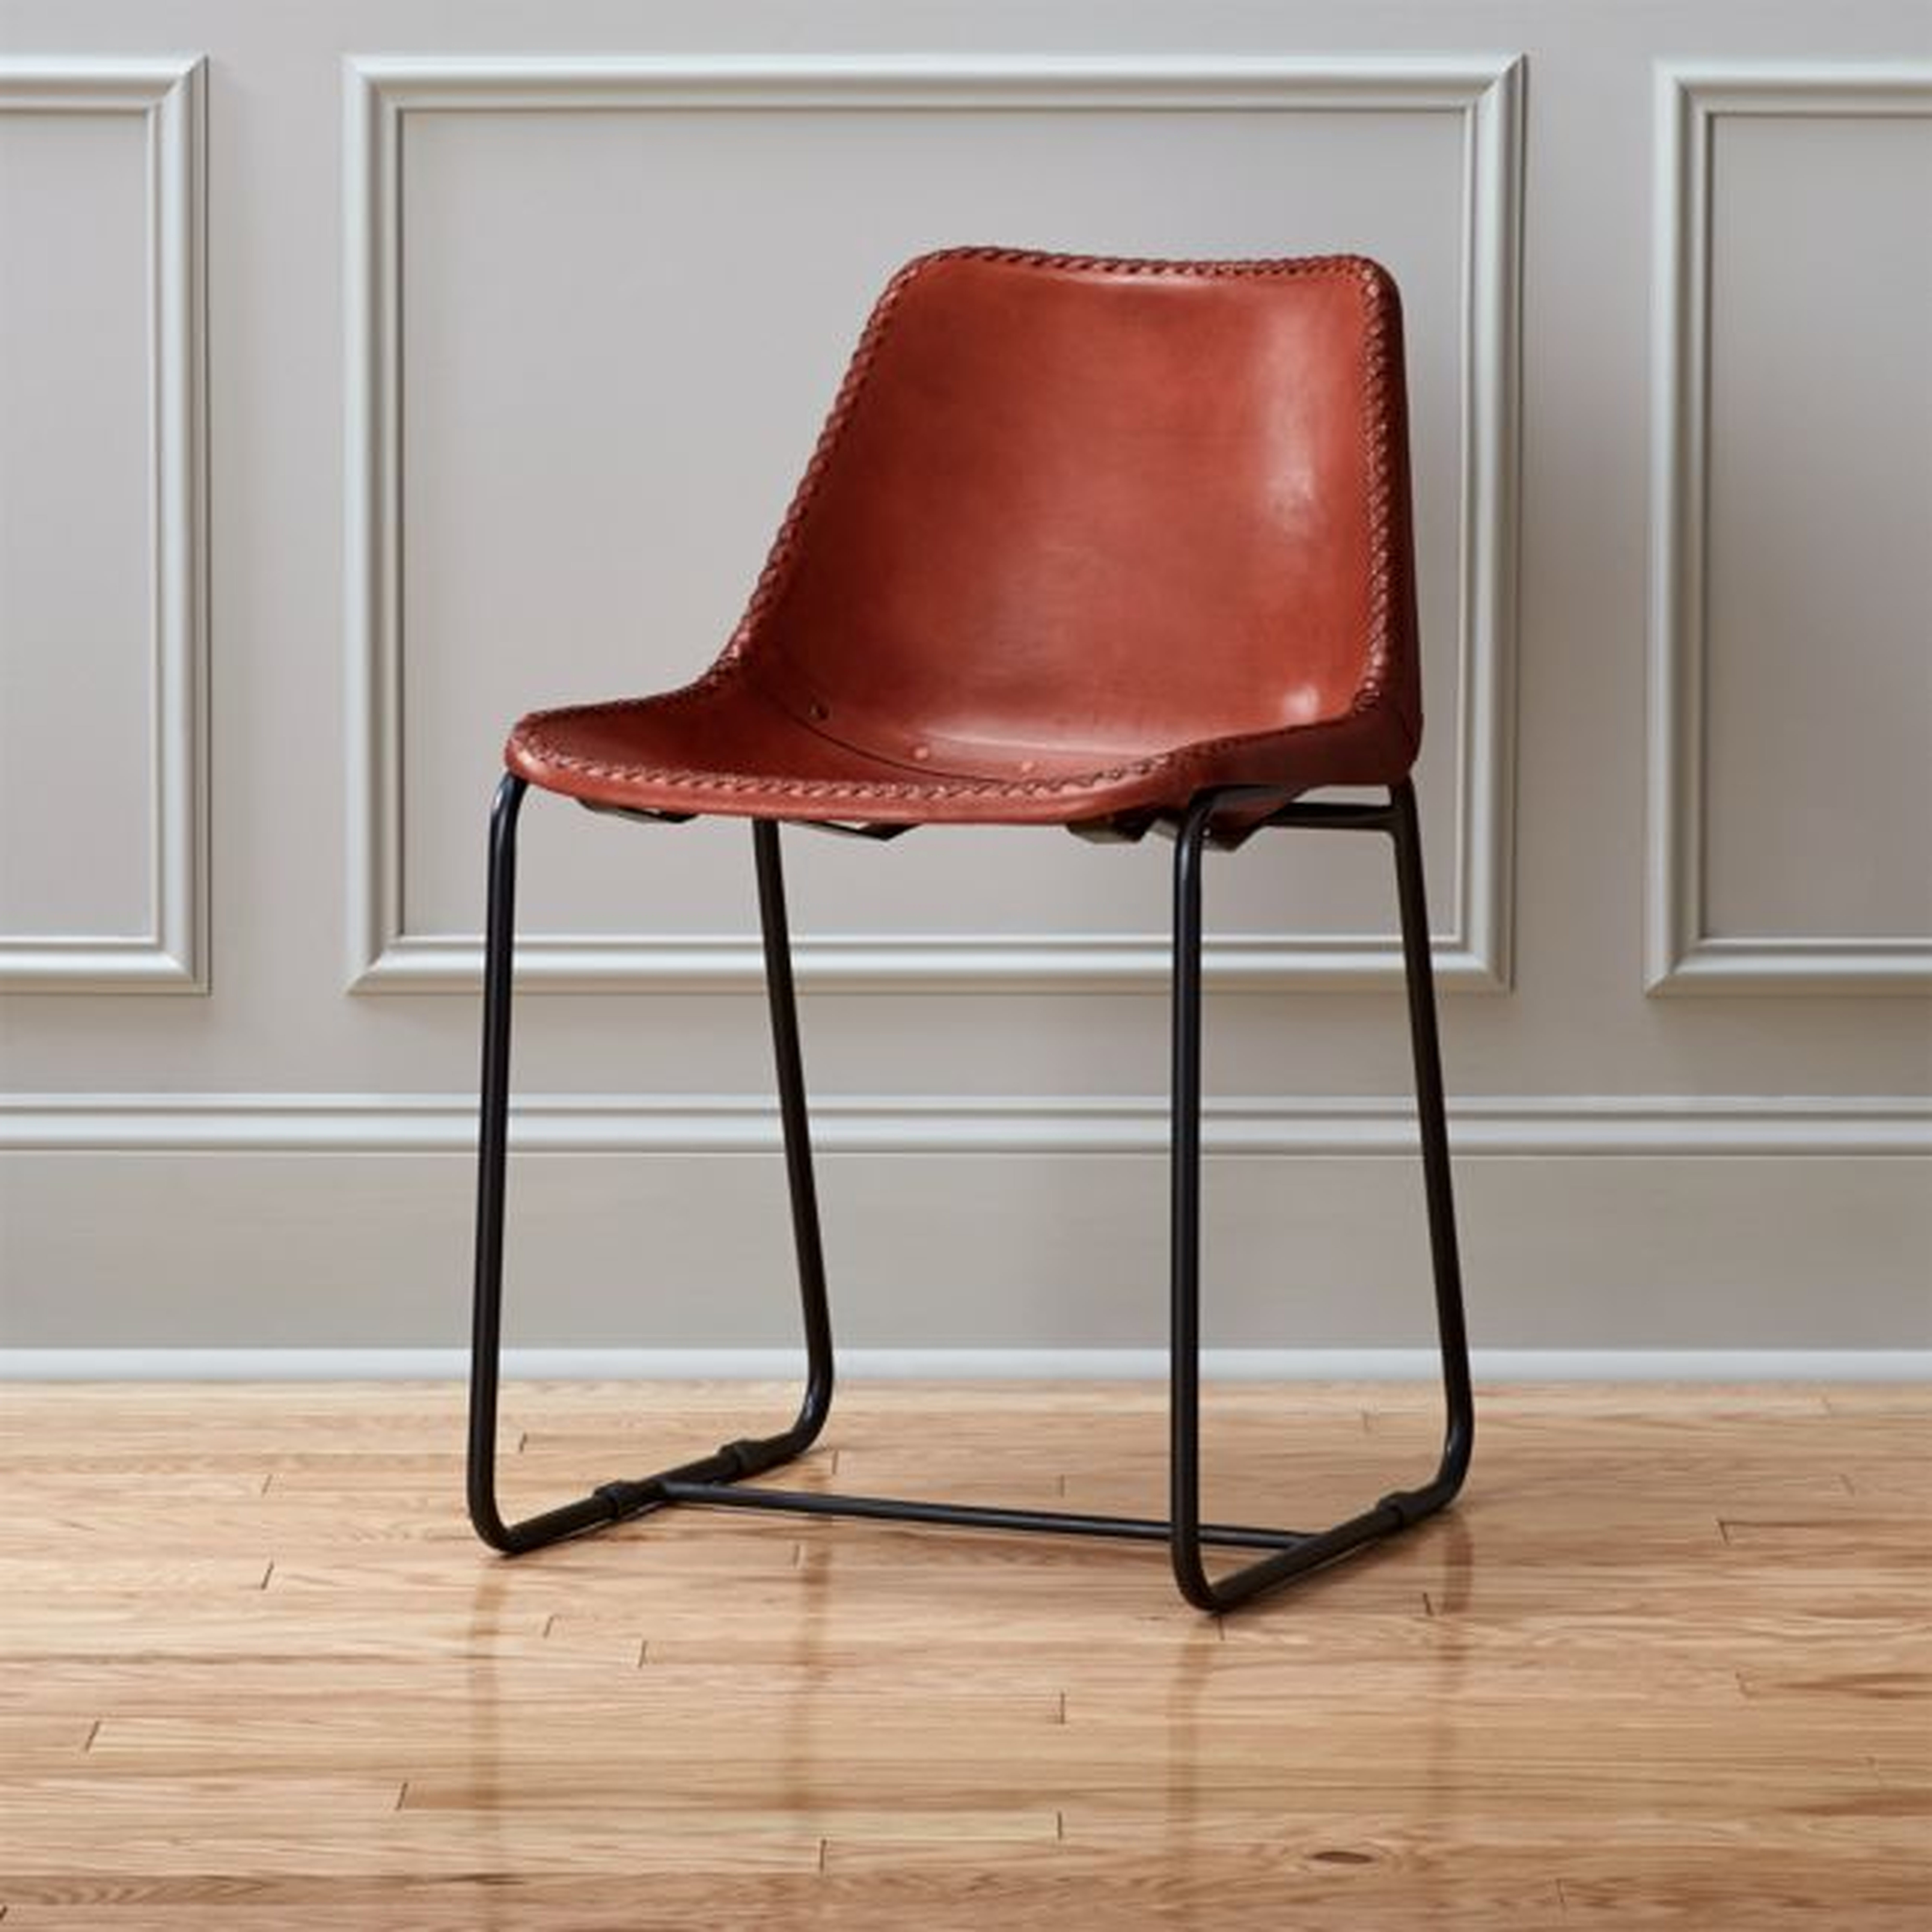 Roadhouse Leather Chair - CB2